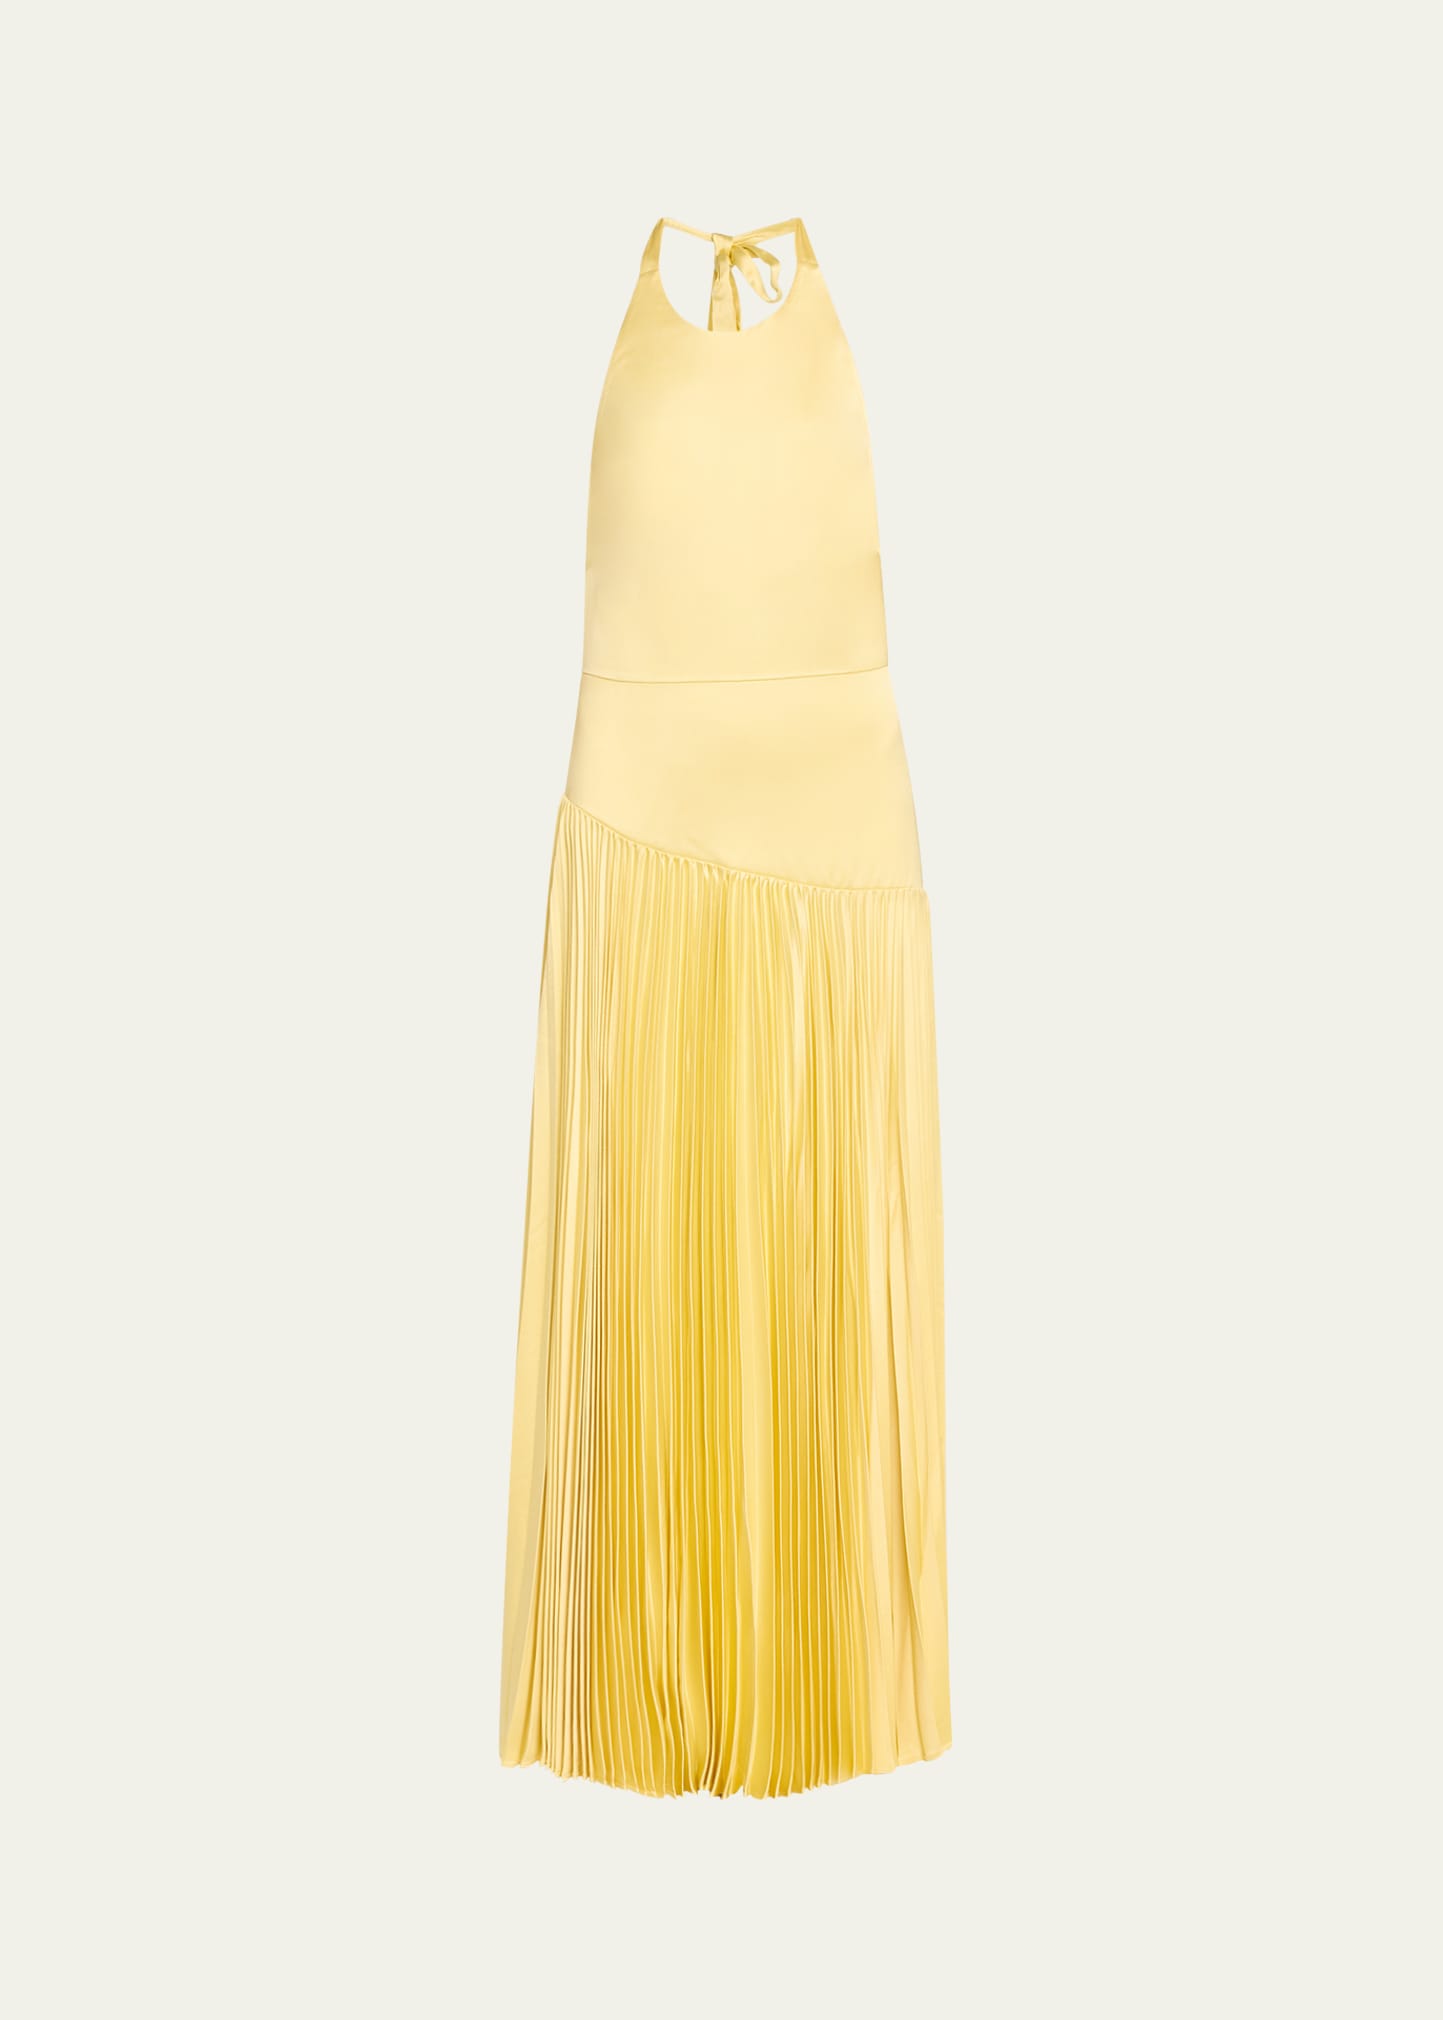 Shop Alexis Saab Pleated Satin Backless Halter Dress In Light Yellow